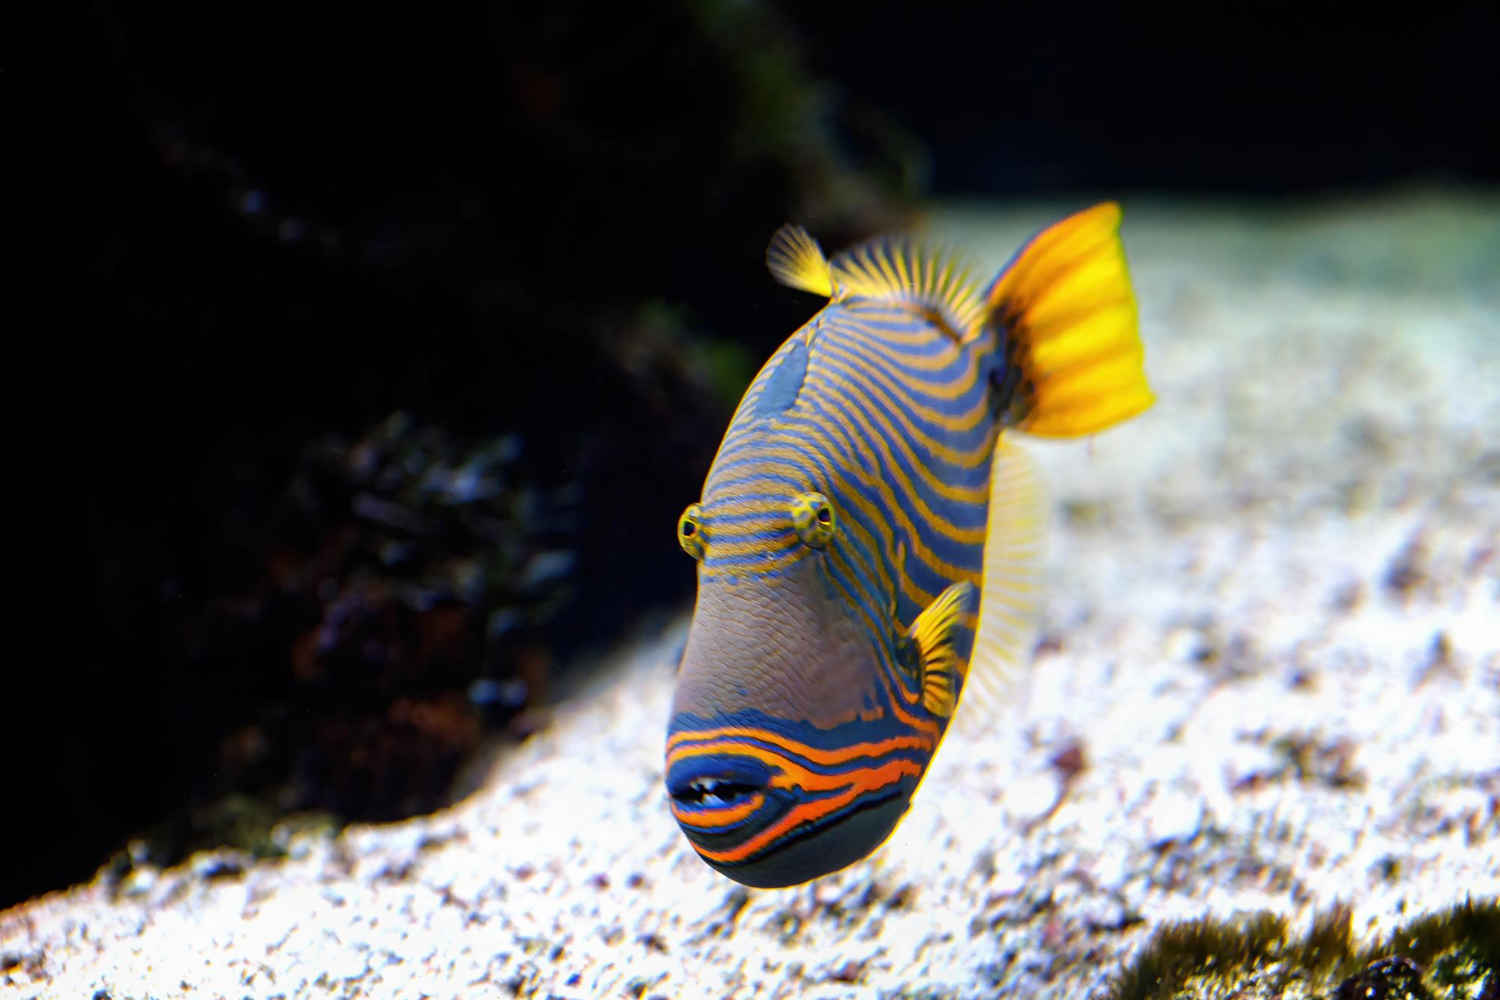 What is the best way to clean aquarium decorations?